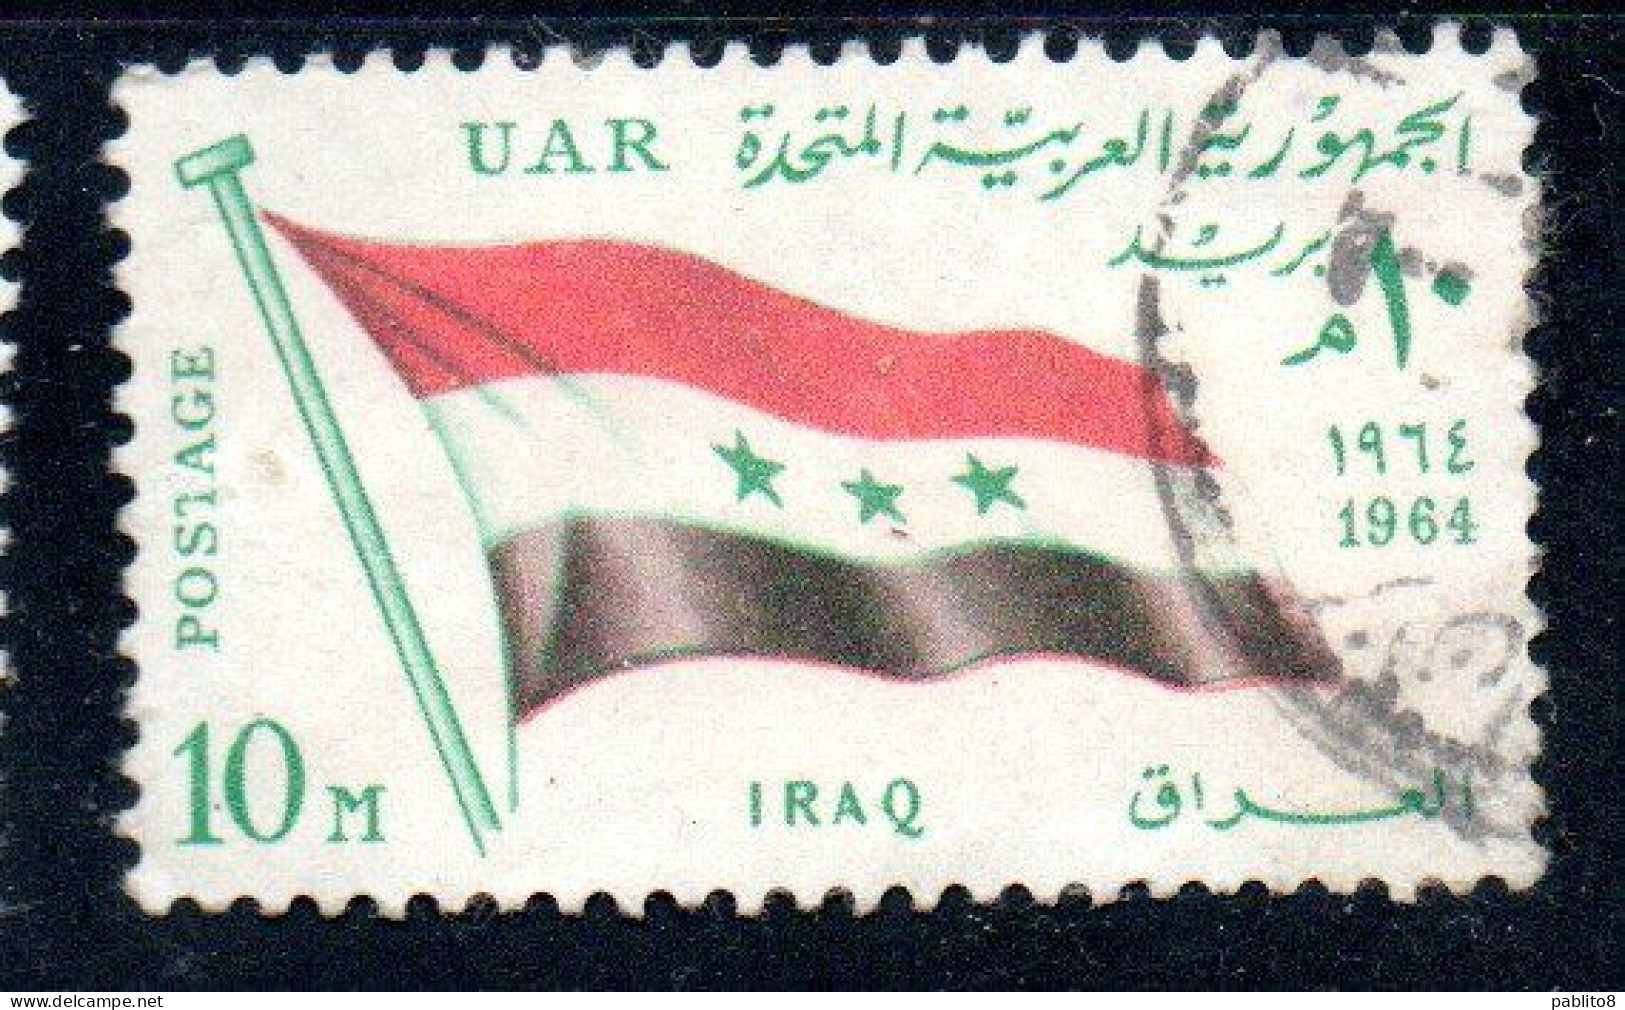 UAR EGYPT EGITTO 1964 SECOND MEETING OF HEADS STATE ARAB LEAGUE FLAG OF IRAQ 10m USED USATO OBLITERE' - Usados